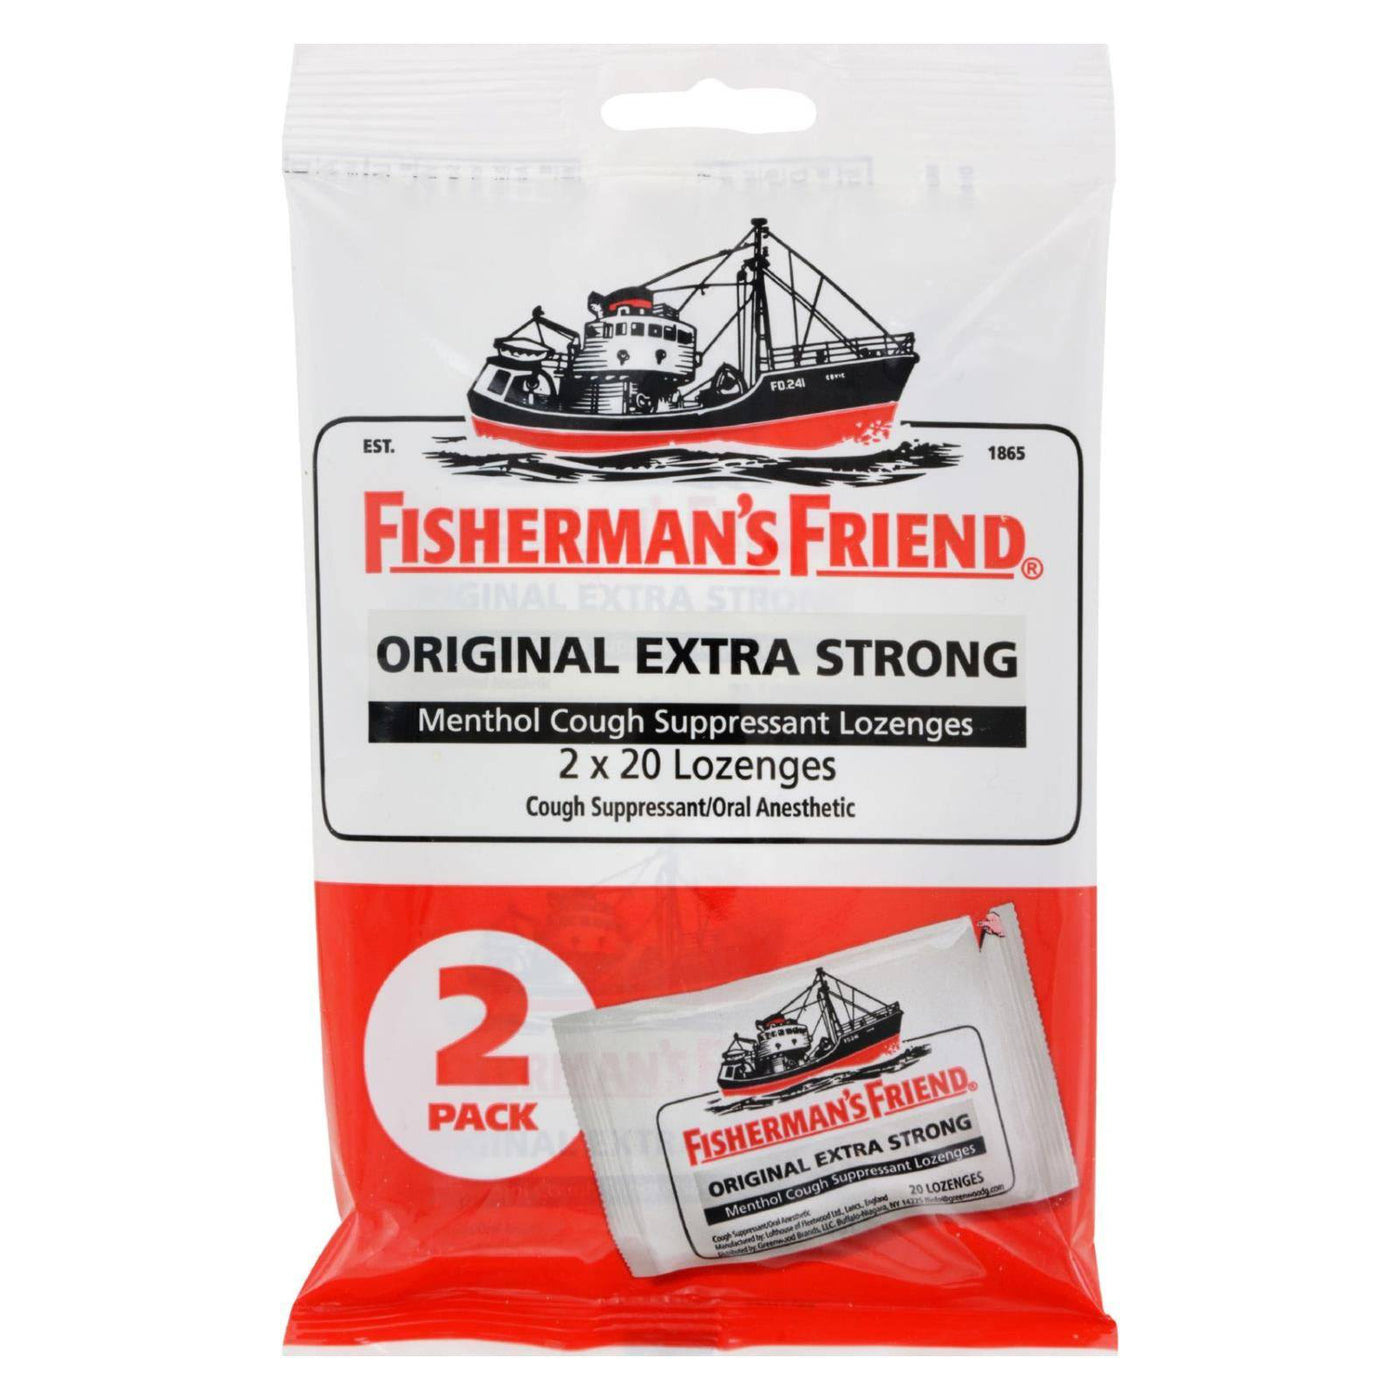 Buy Fisherman's Friend Lozenges - Original Extra Strong - Dsp - 40 Ct - 1 Case  at OnlyNaturals.us